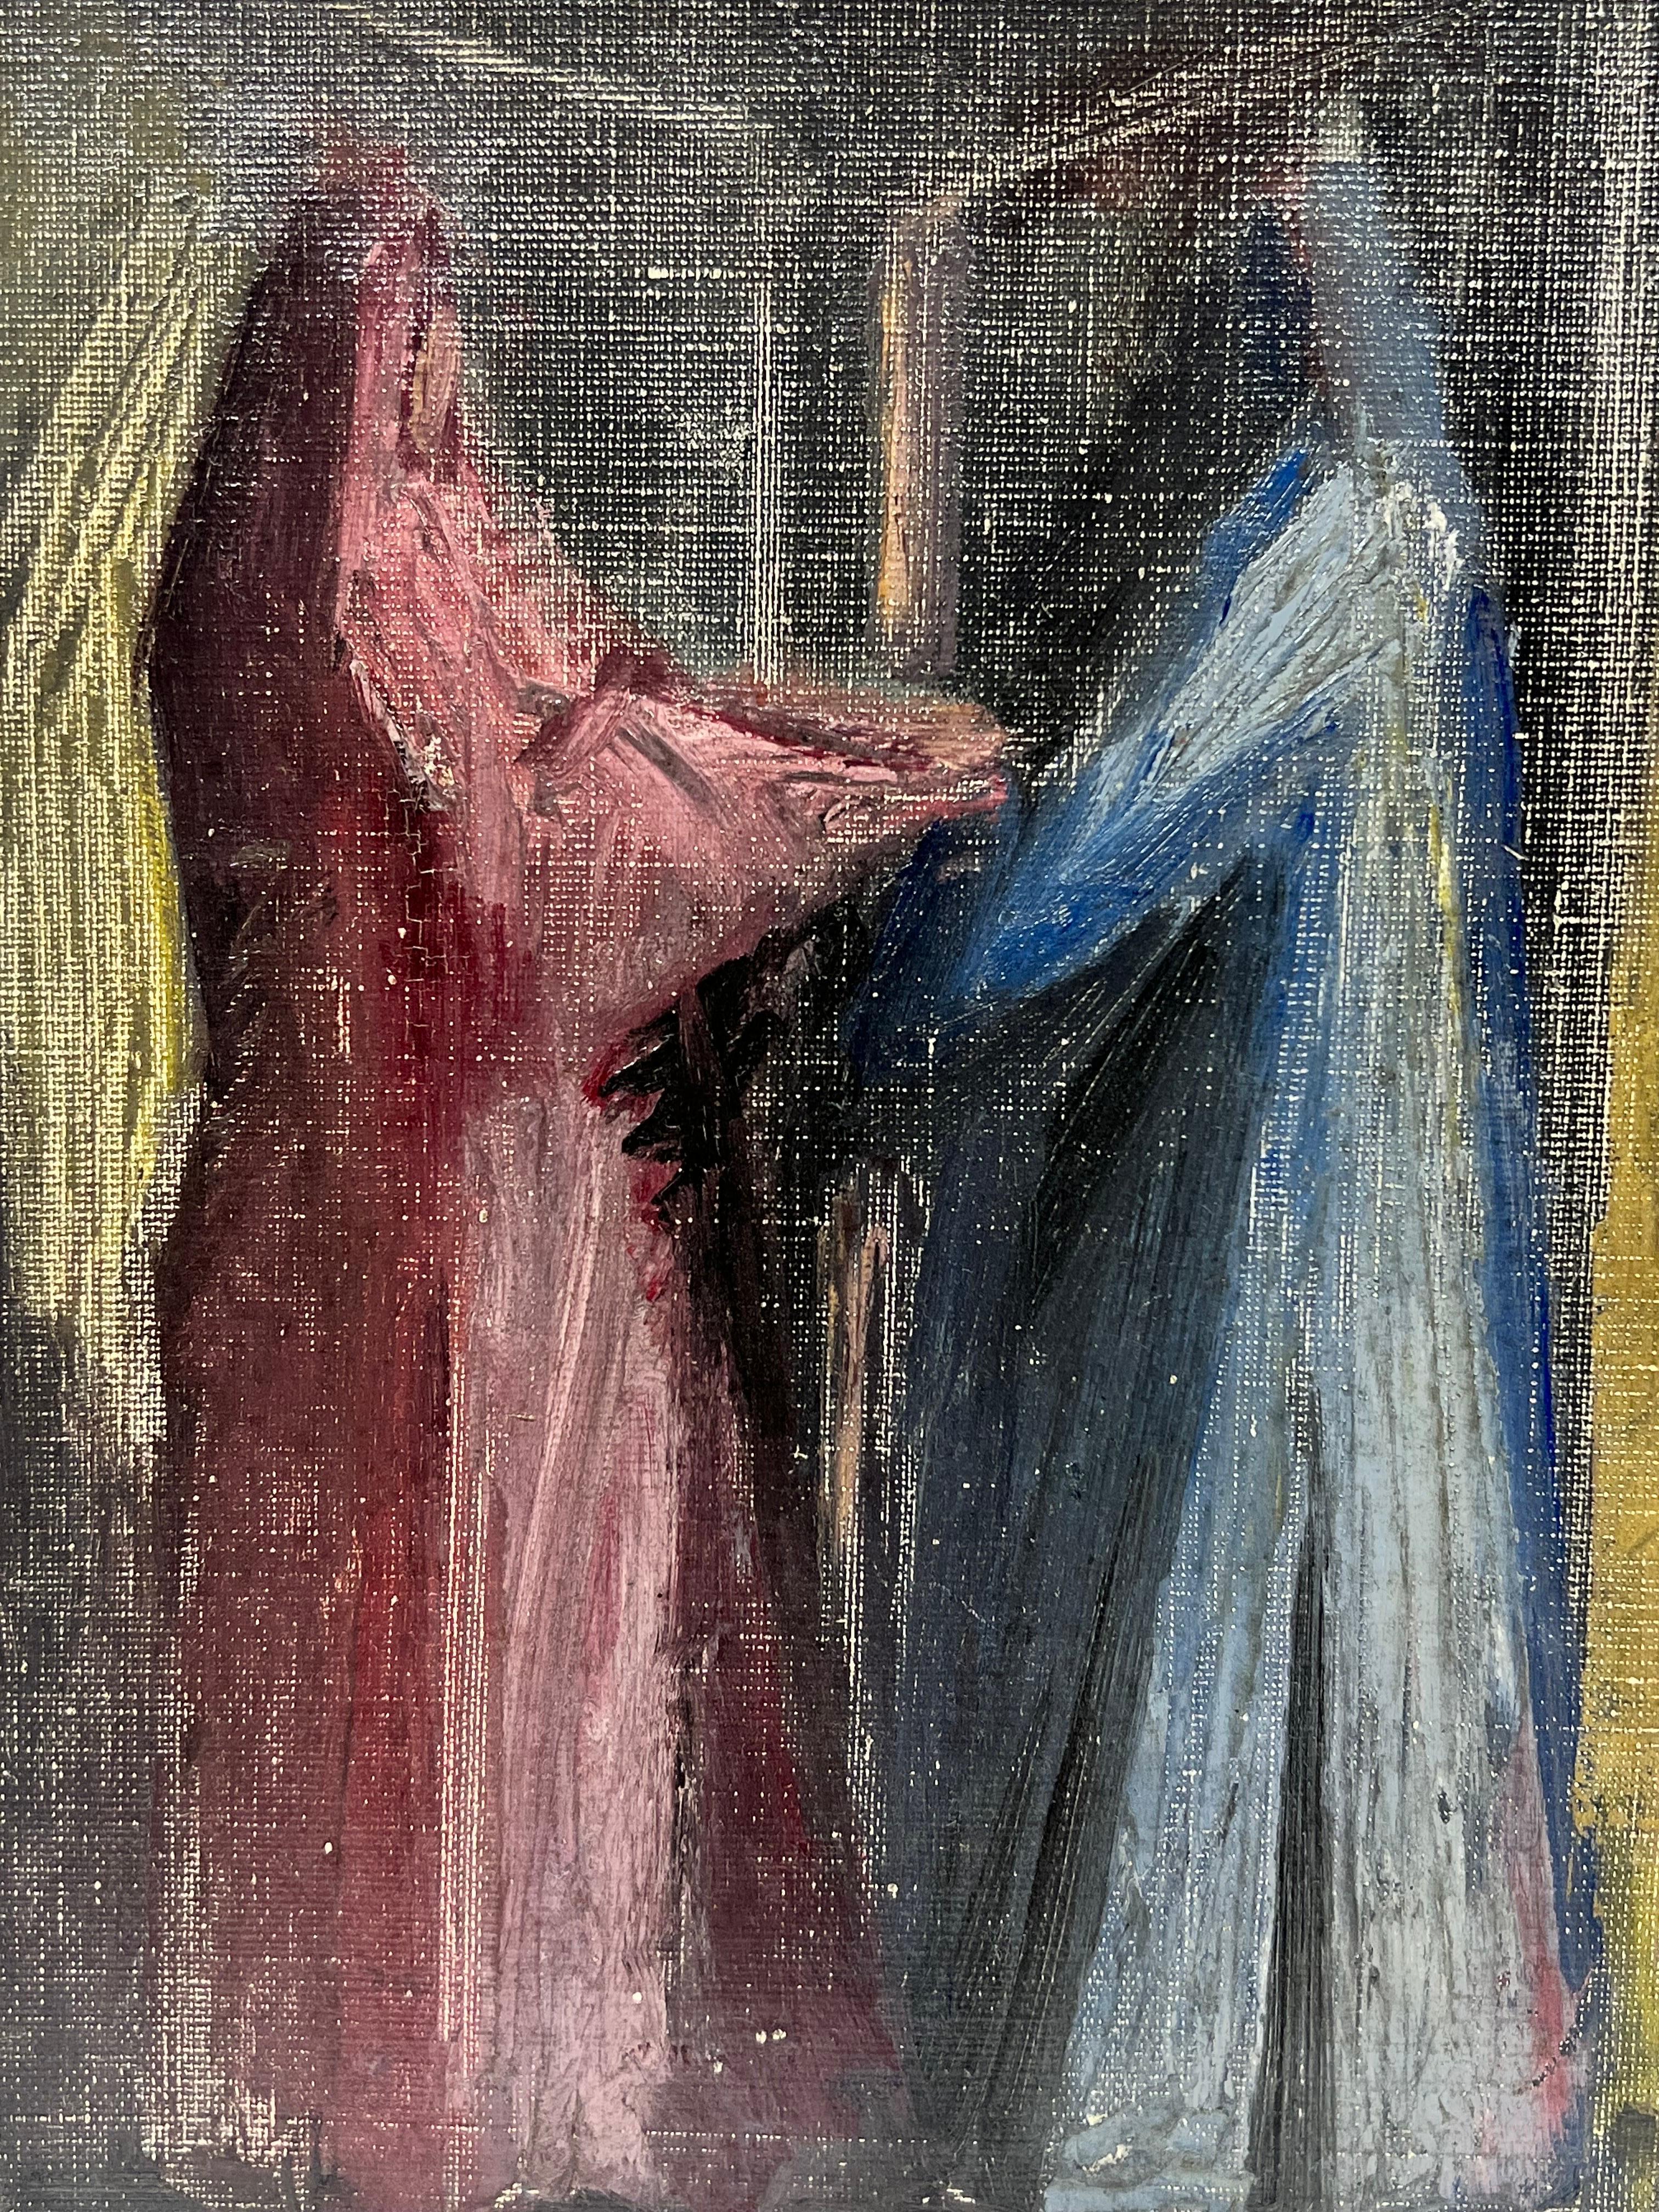 French School, signed verso
circa 1950's
'La Visitation'
oil painting on canvas, unframed
painting: 10.5 x 9 inches
provenance: private French collection
condition: overall very good